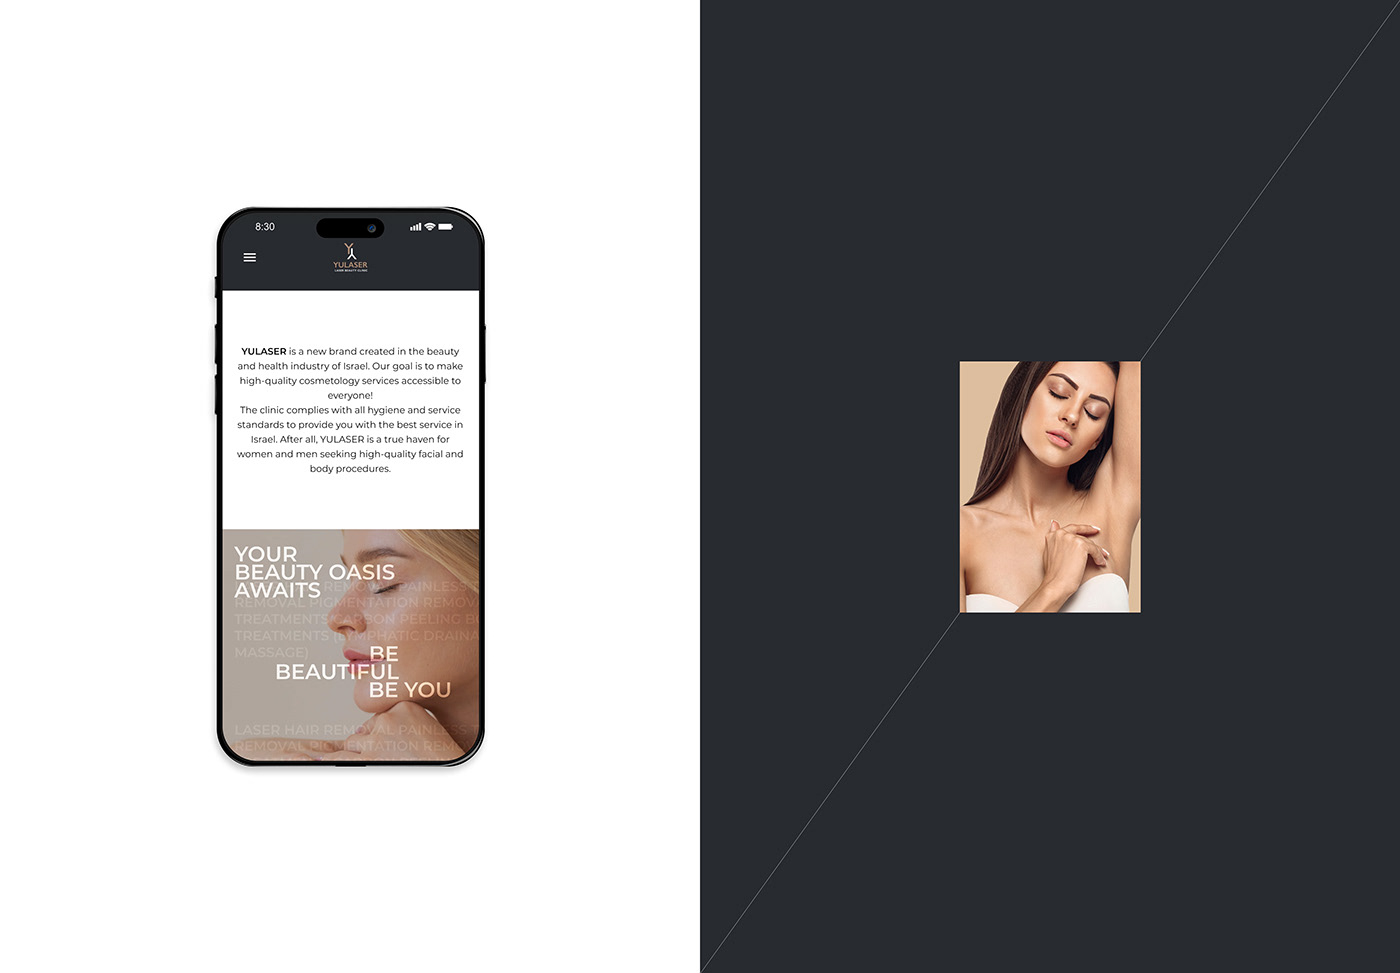 UI UI/UX Website ui design Figma user interface Interface clinic Laser Hair Removal beauty